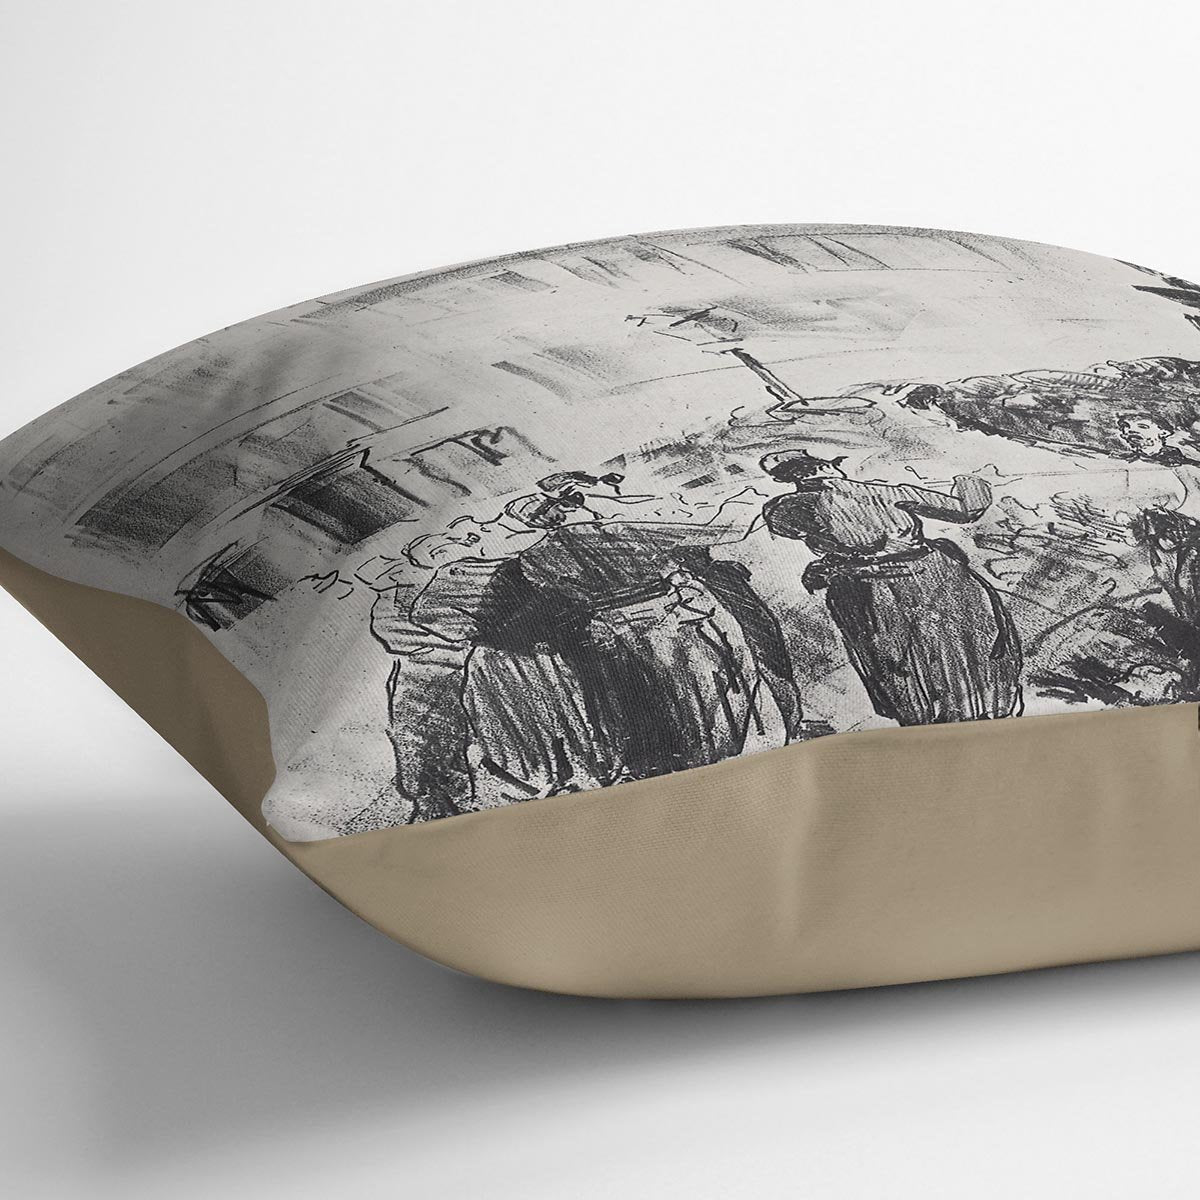 The Barricade by Manet Throw Pillow